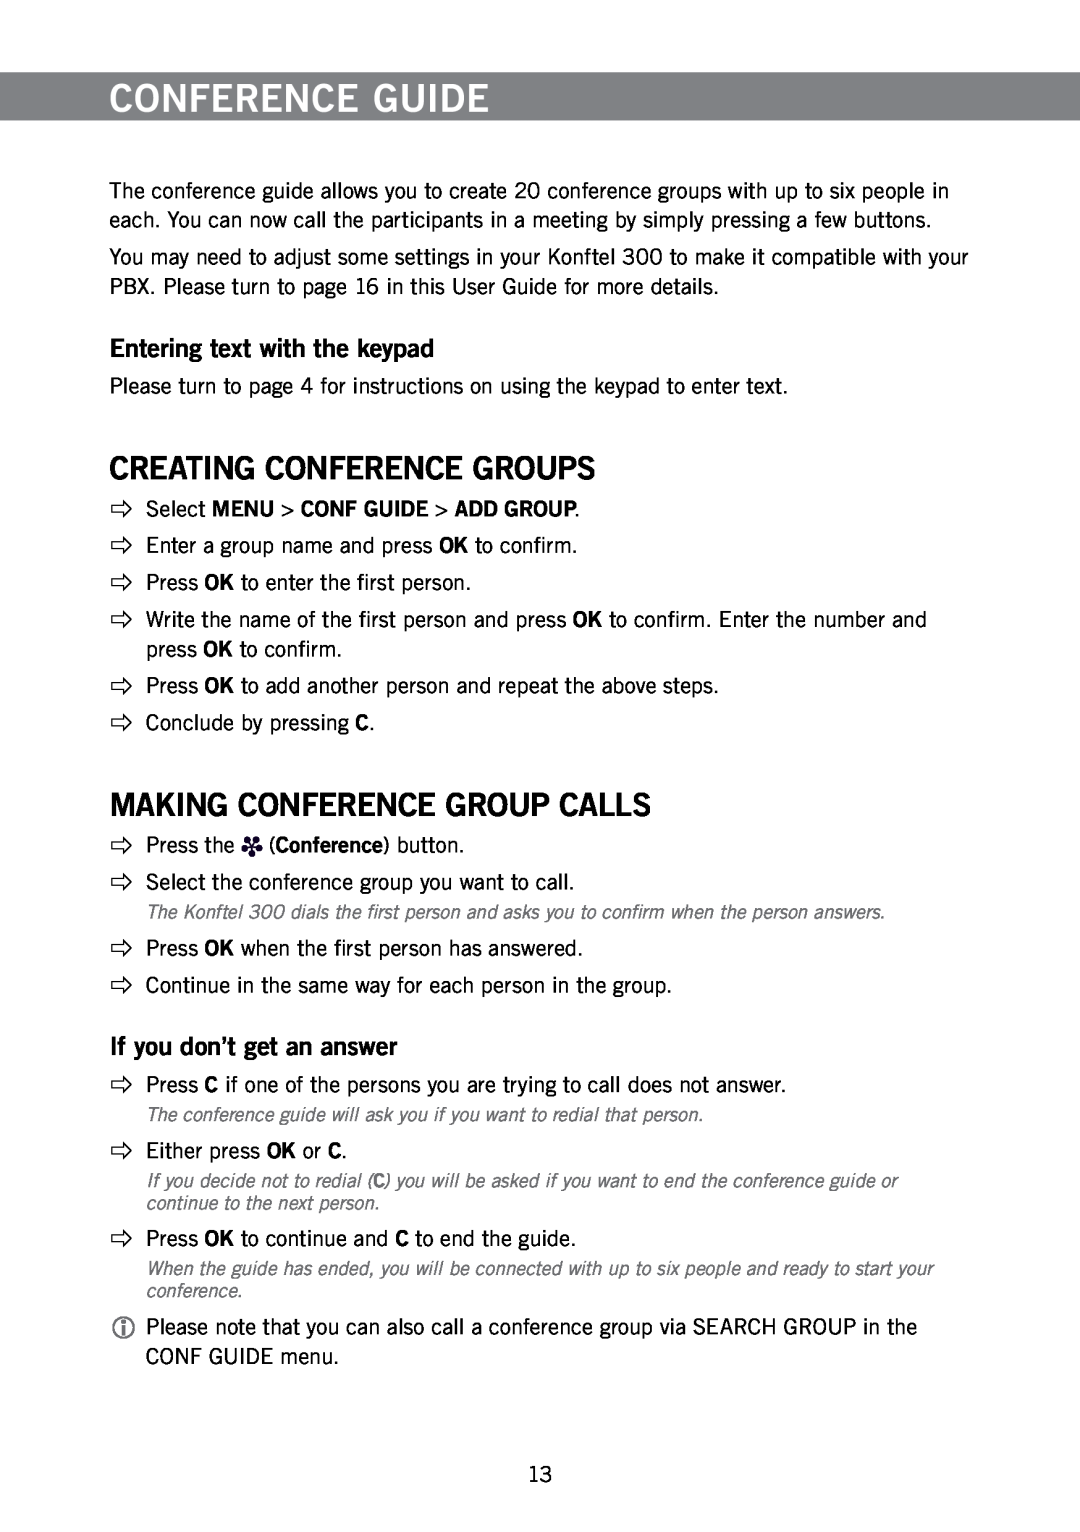 Konftel 300 Conference Guide, Creating Conference Groups, Making Conference Group Calls, Entering text with the keypad 